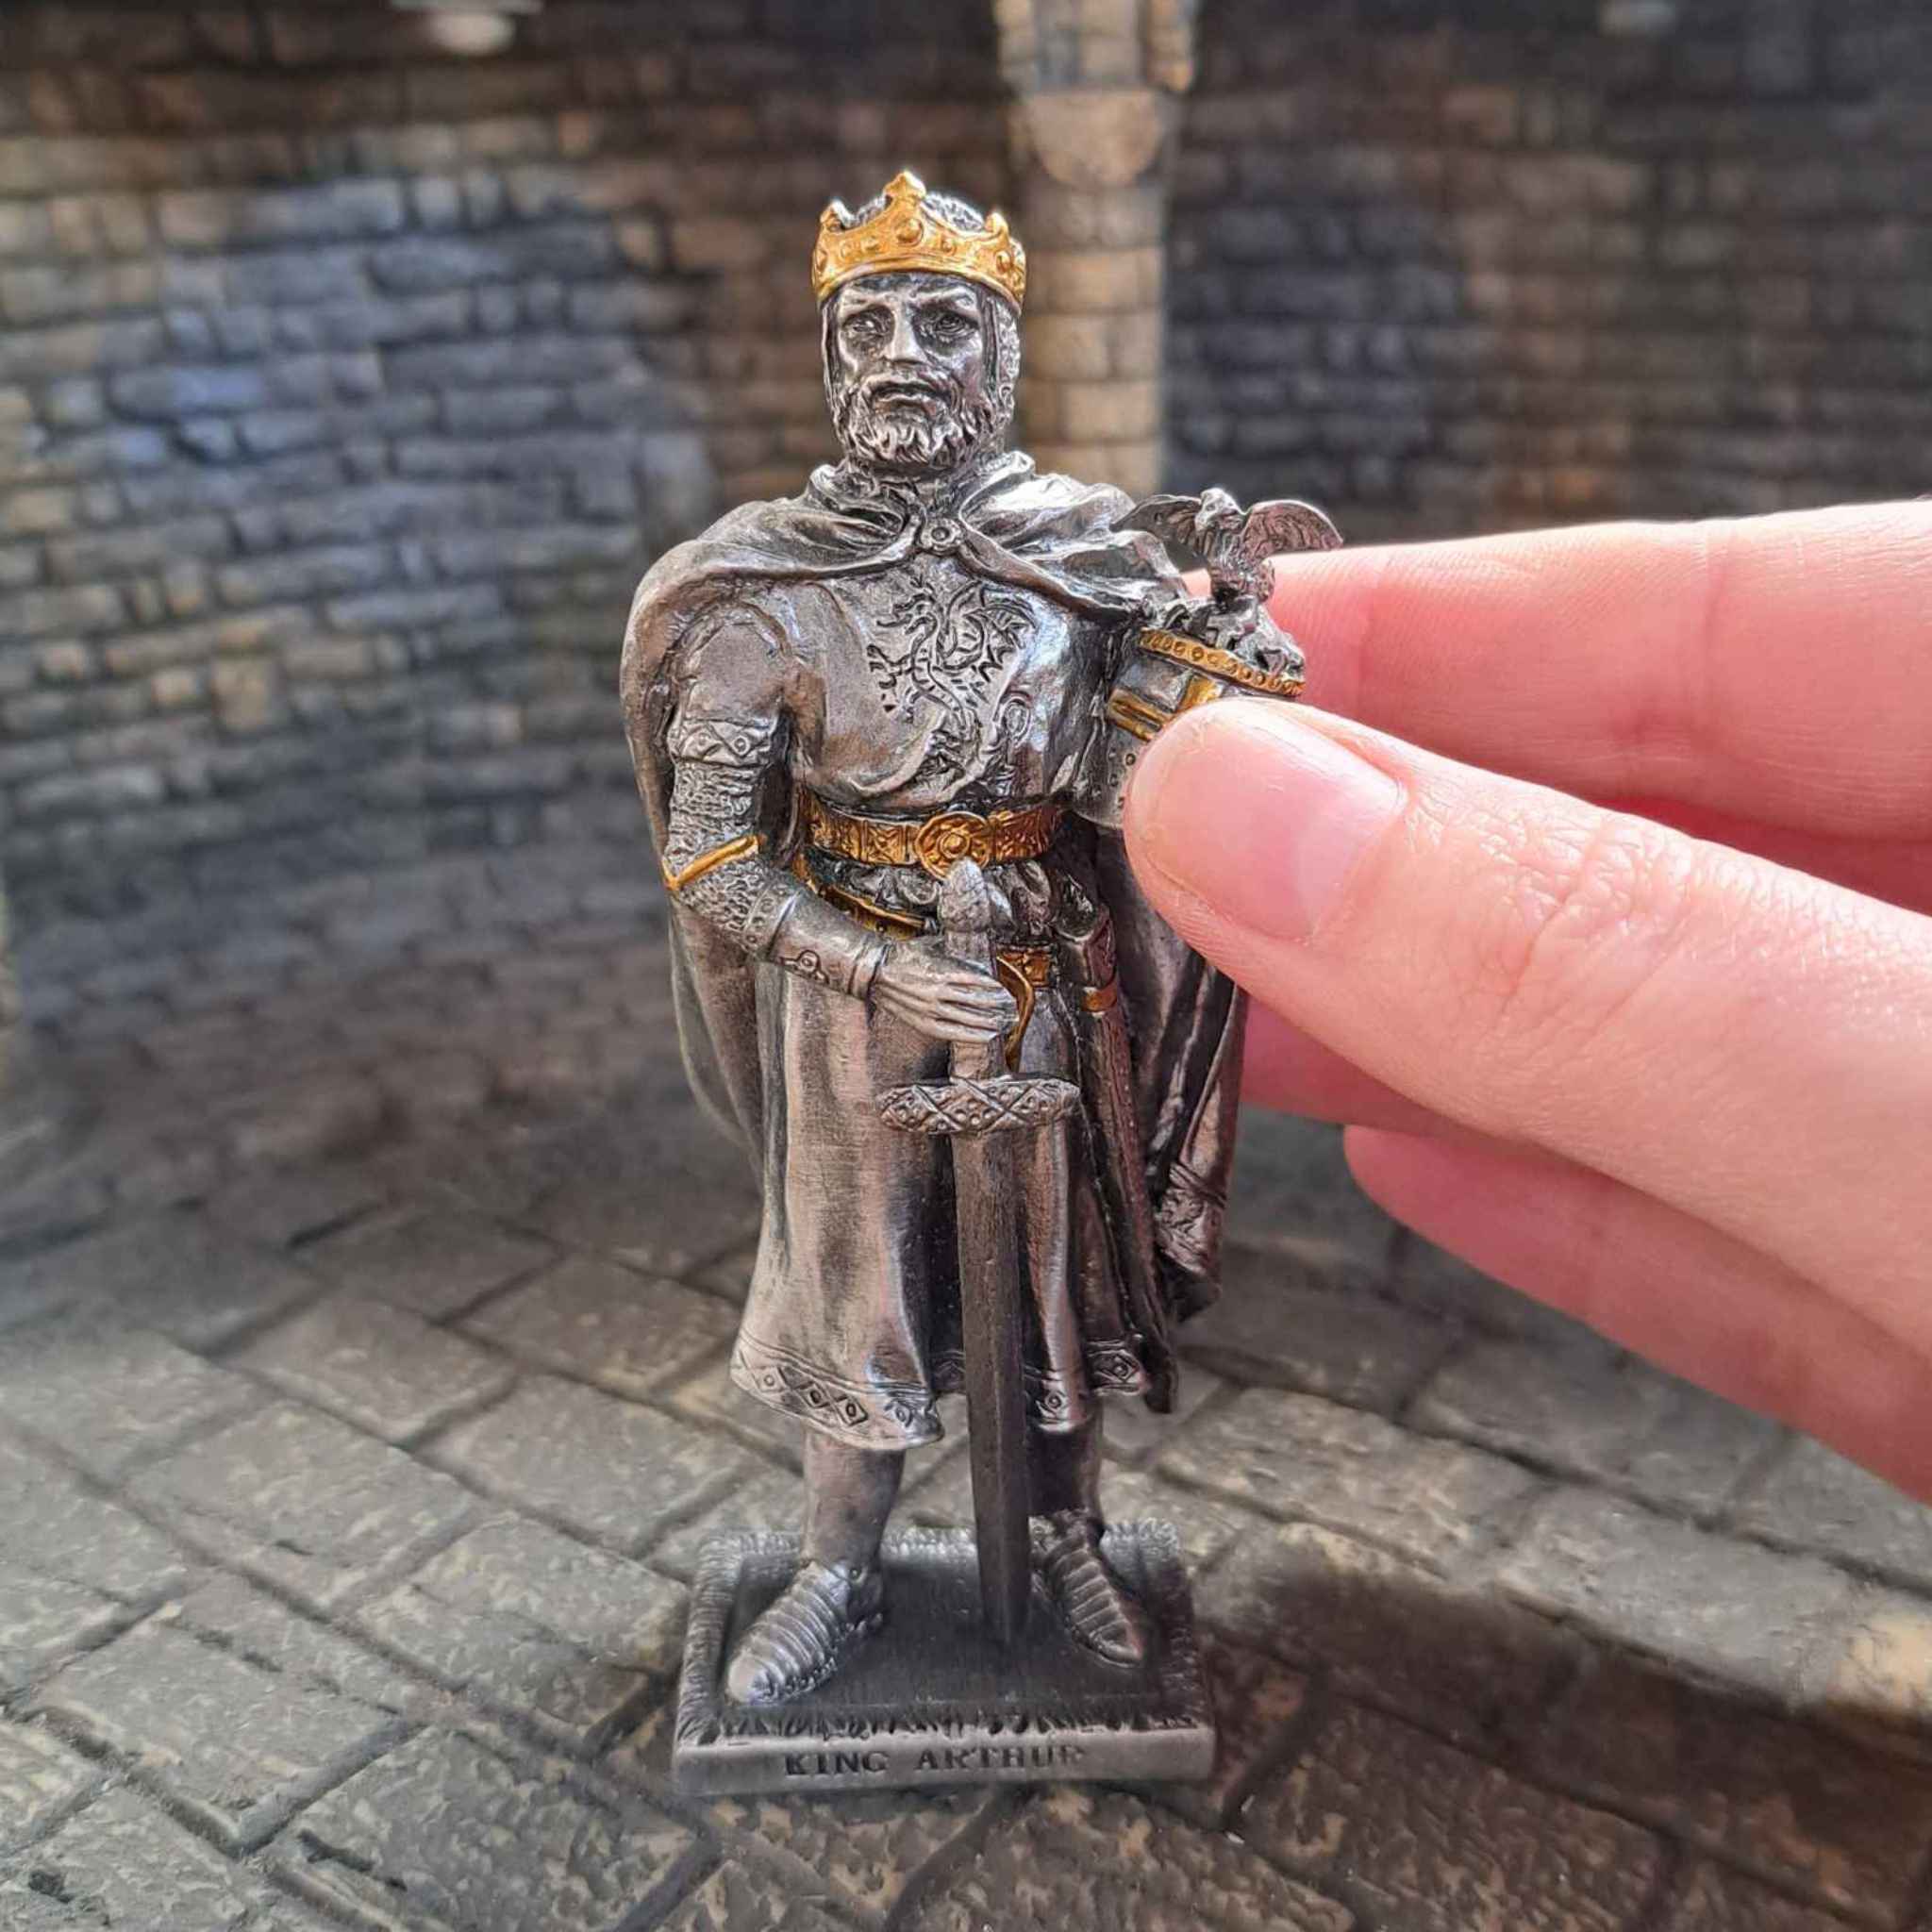 King Arthur Statue with hand pictured for scale